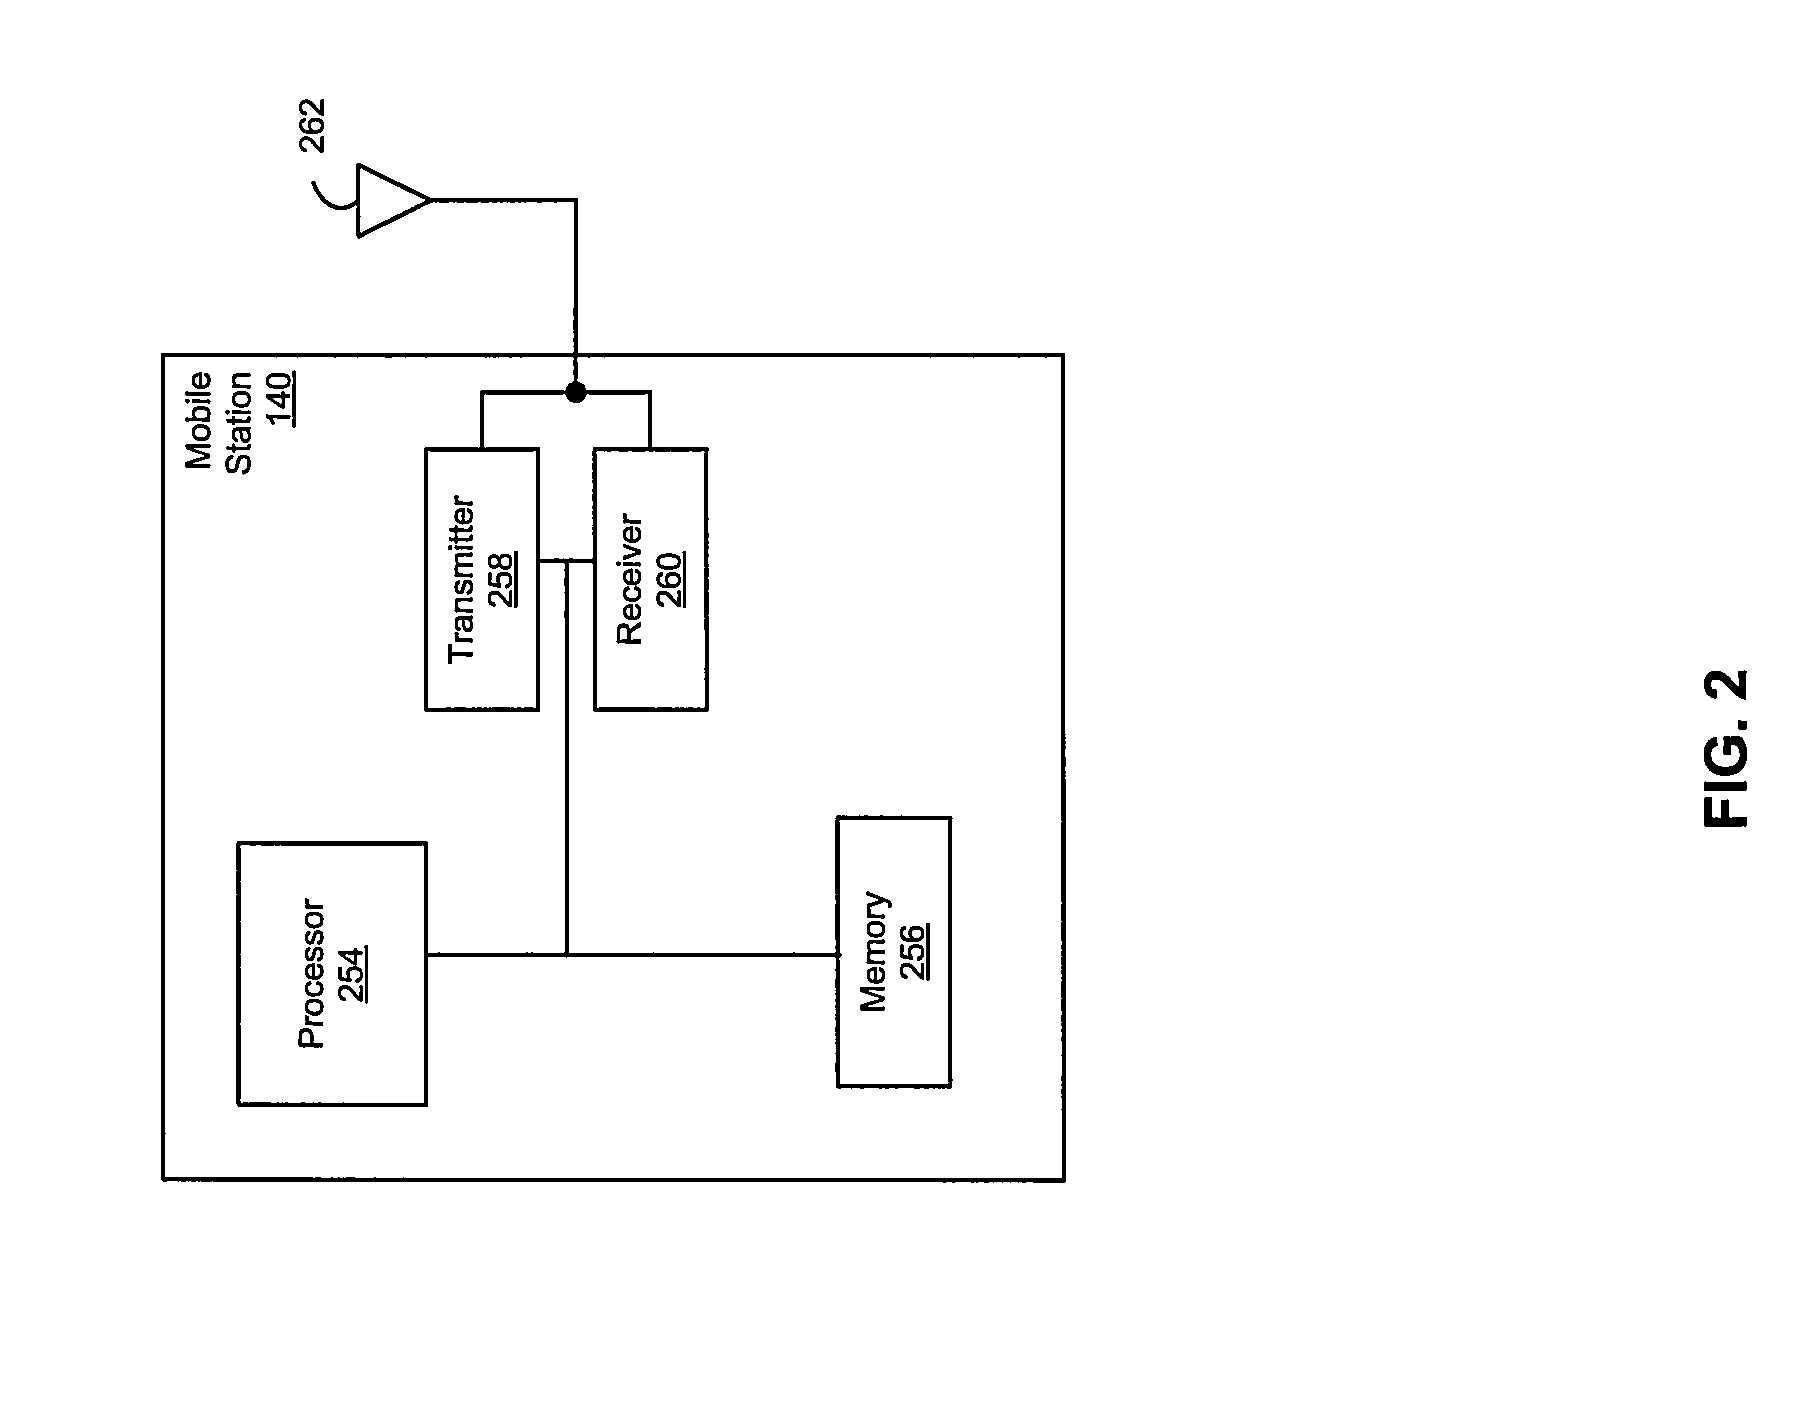 Method and System for Signal Phase Variation Detection in Communication Systems